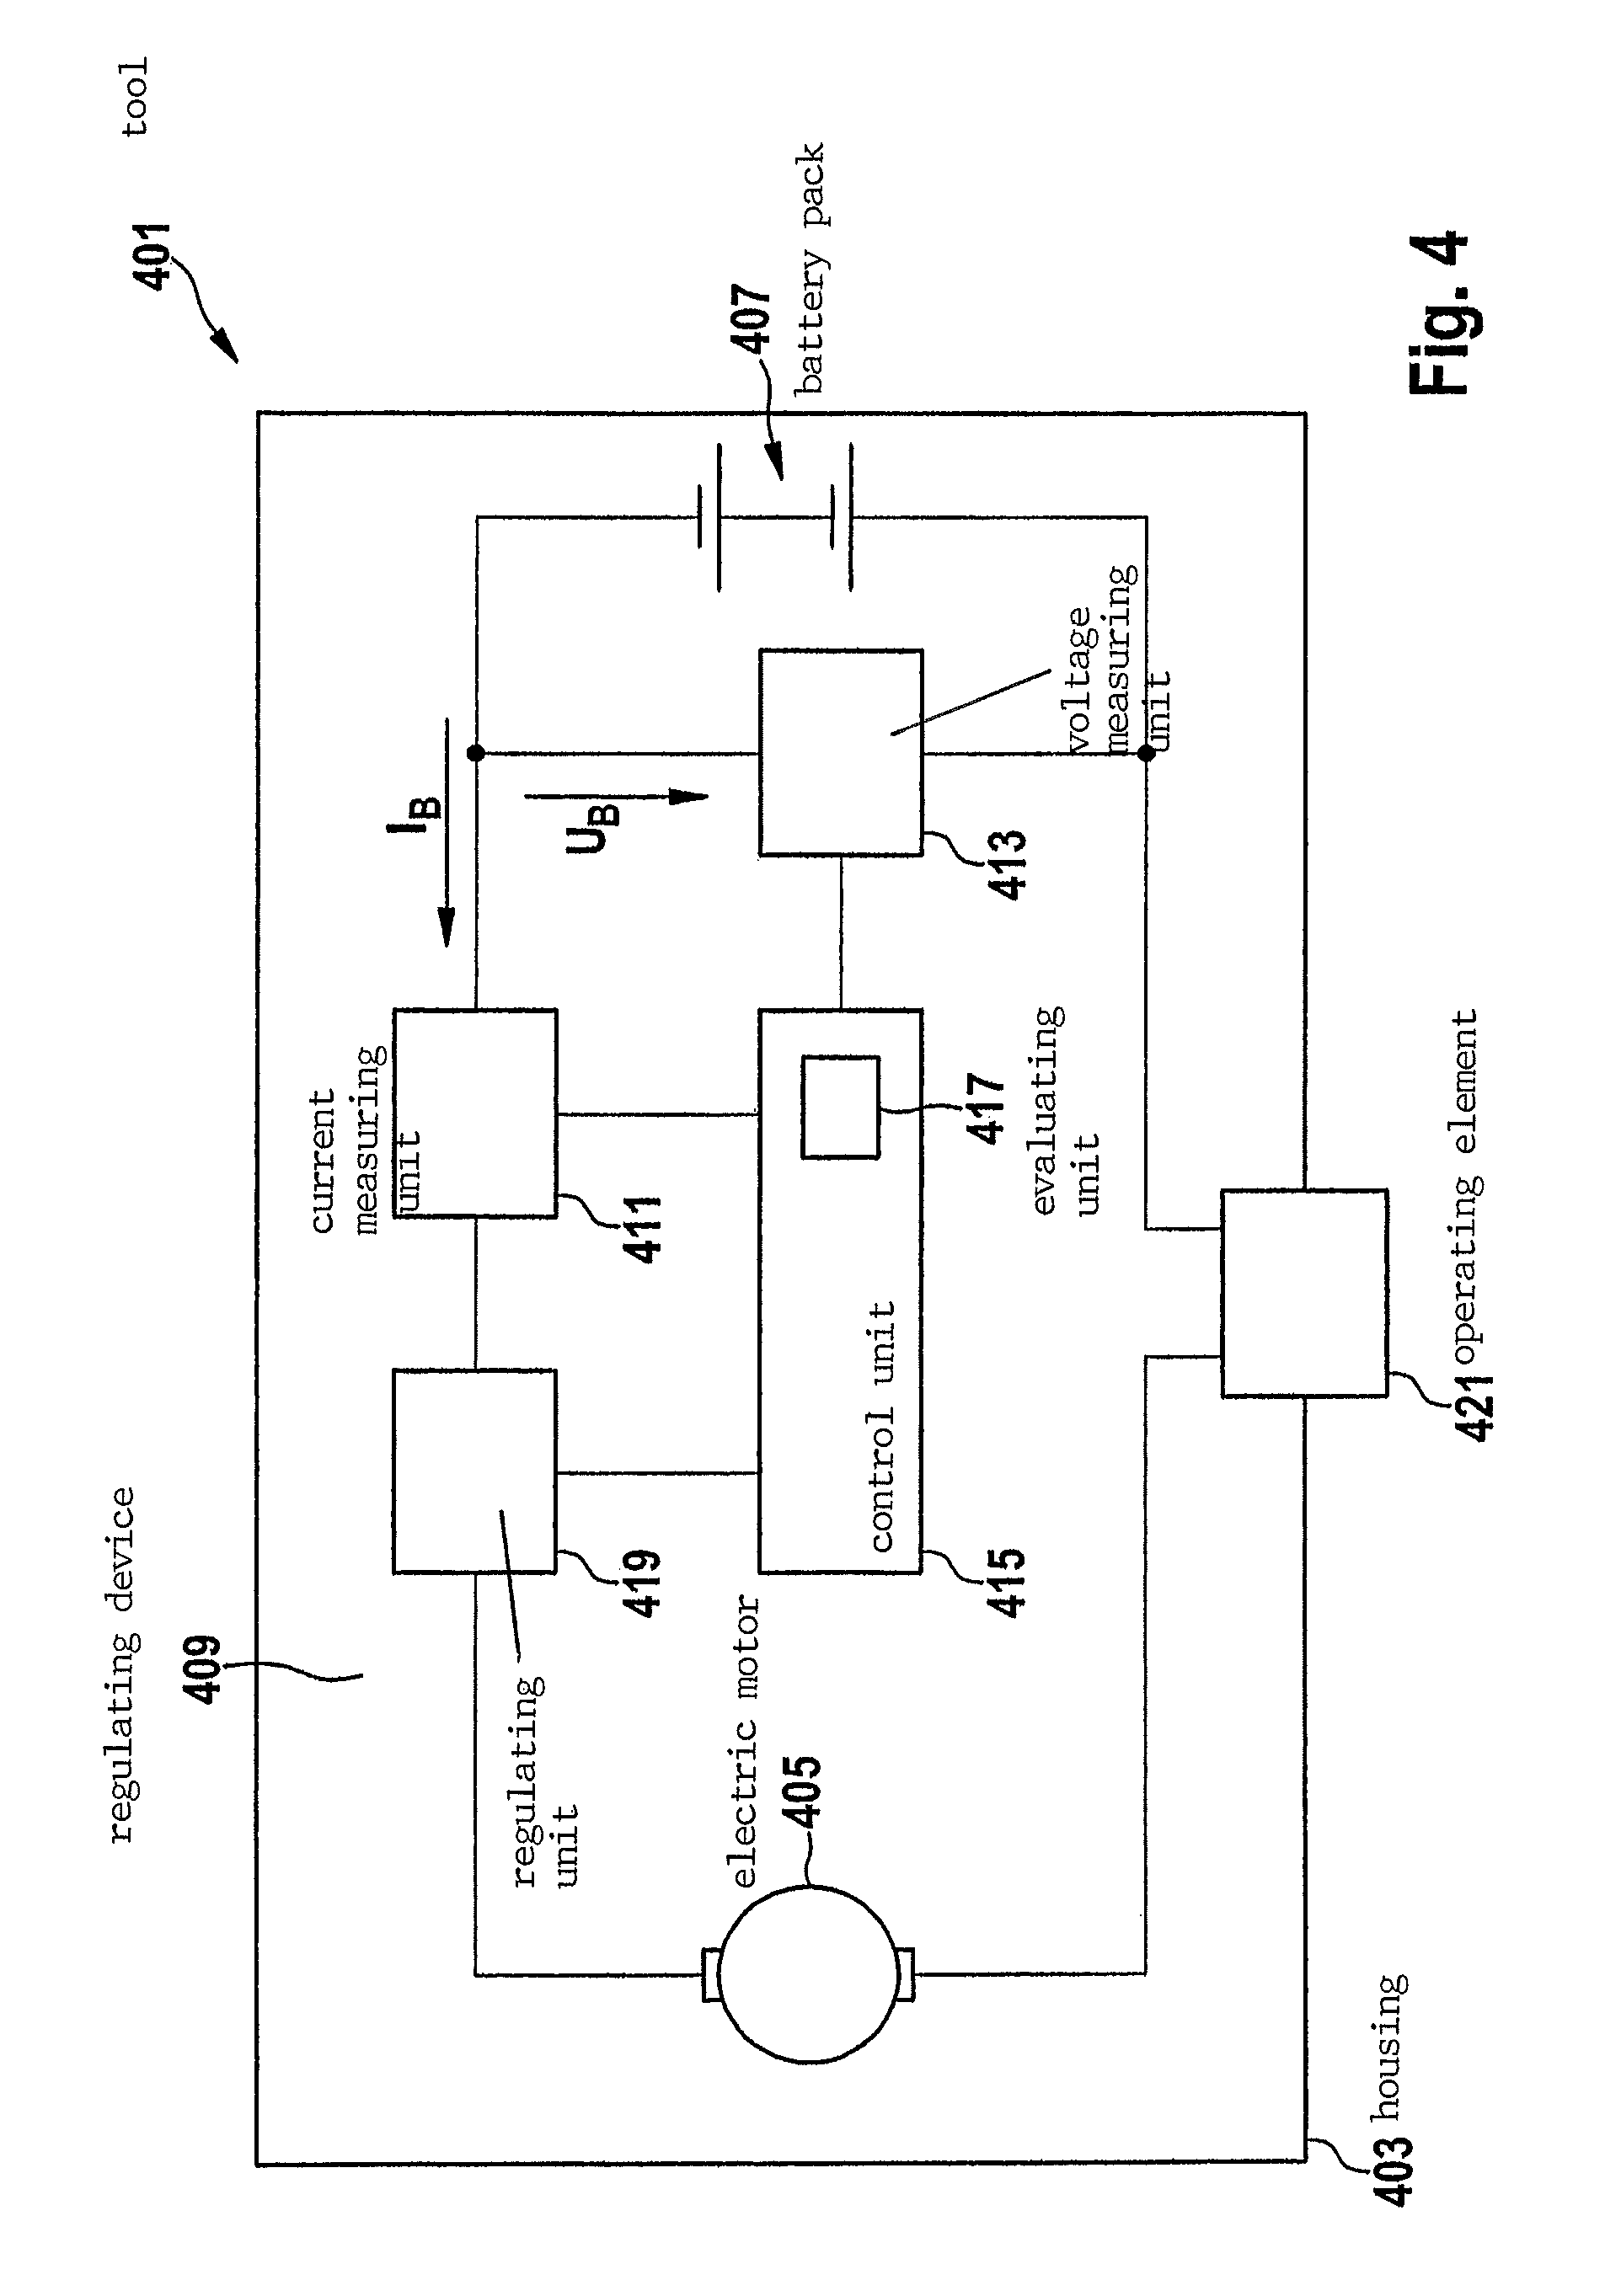 Device and method for regulating an increase in the output torque over time of an electric drive motor